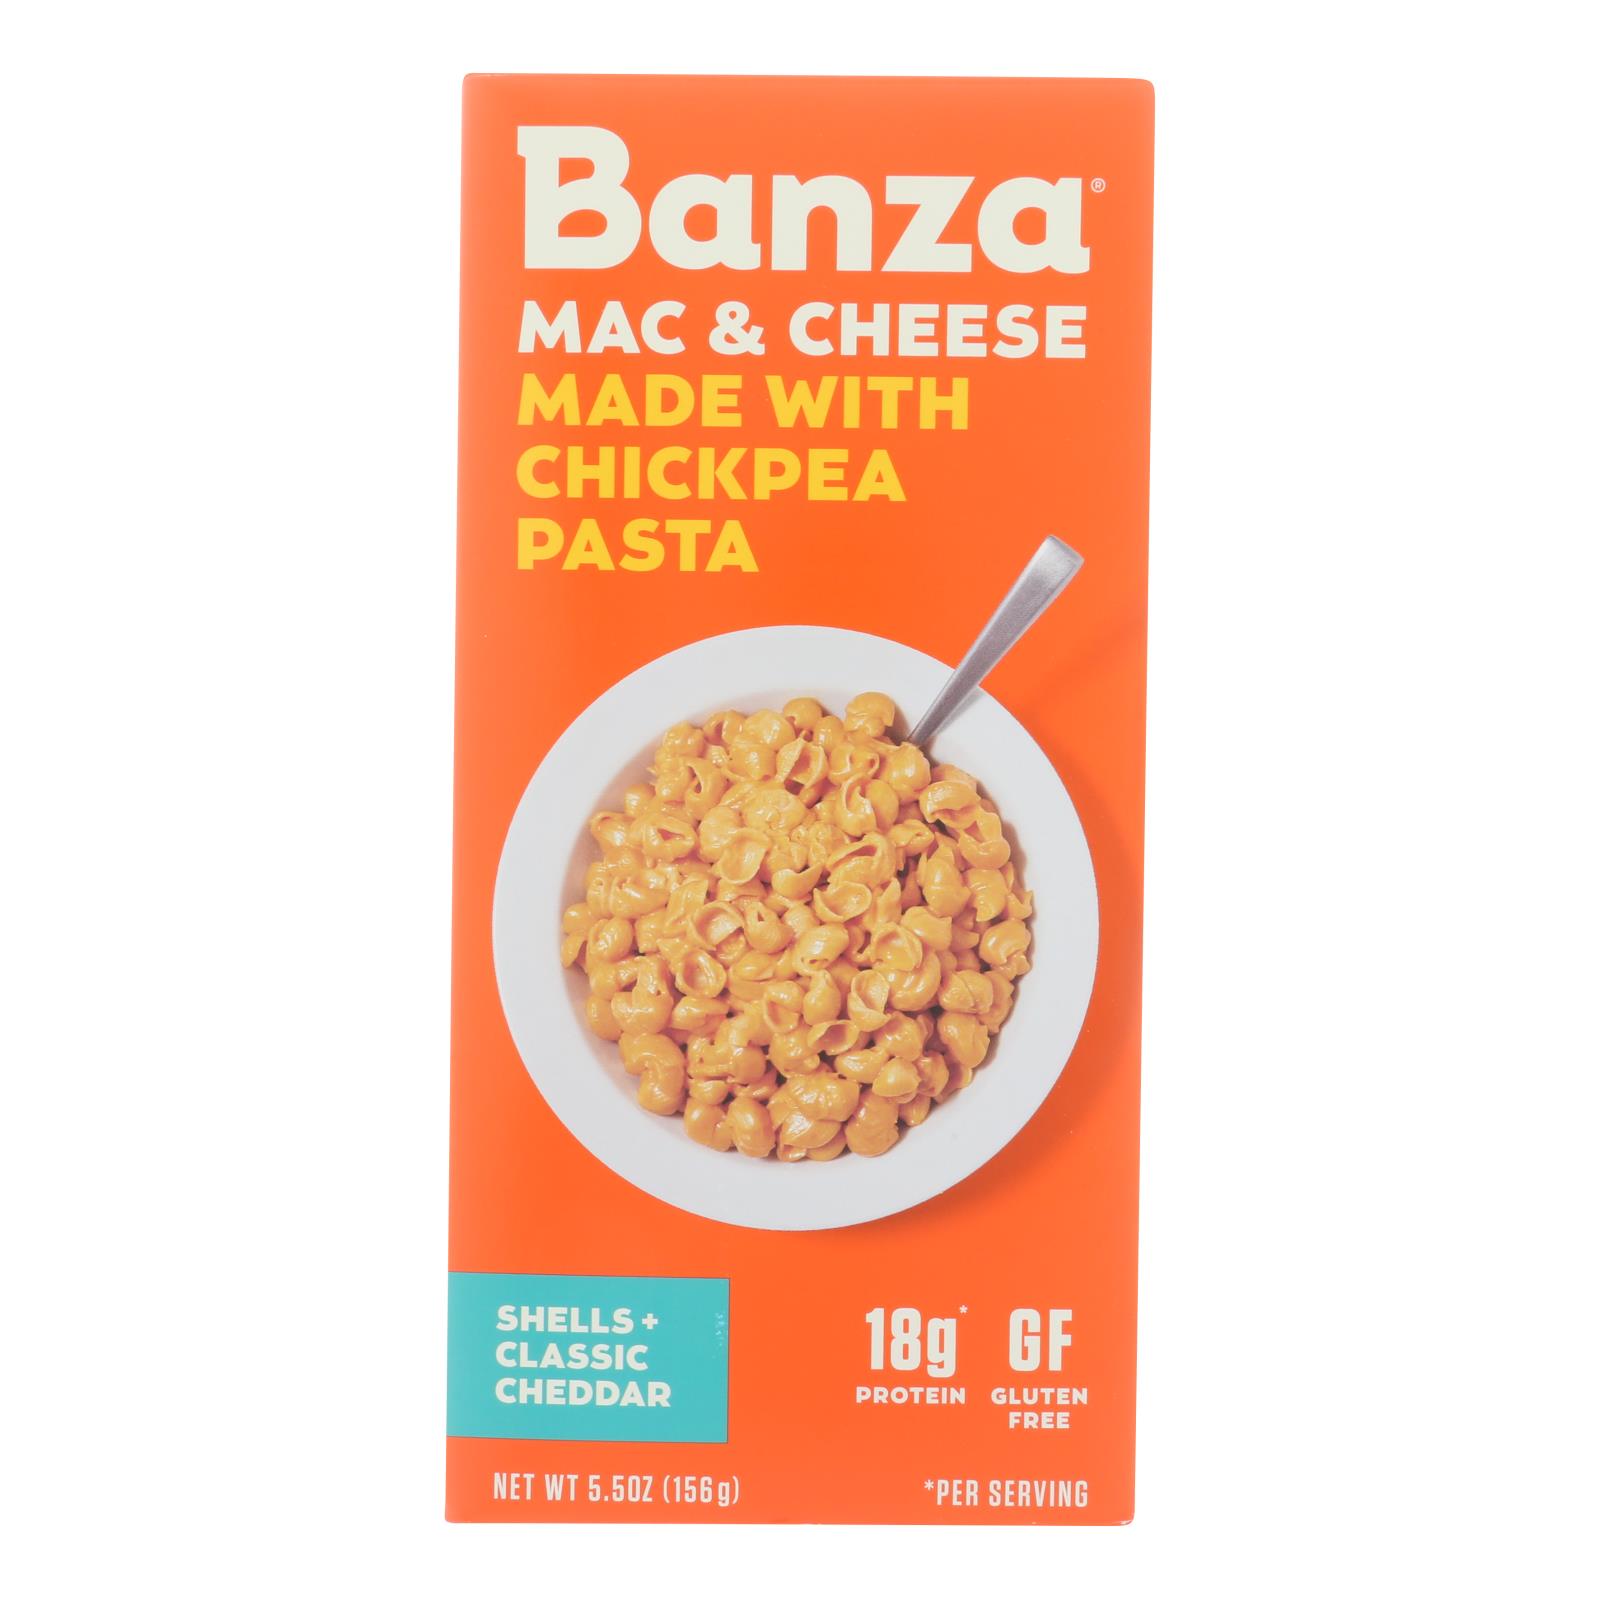 Banza - Chickpea Pasta Mac and Cheese - Shells and Classic Cheddar - 6개 묶음상품 - 5.5 oz.